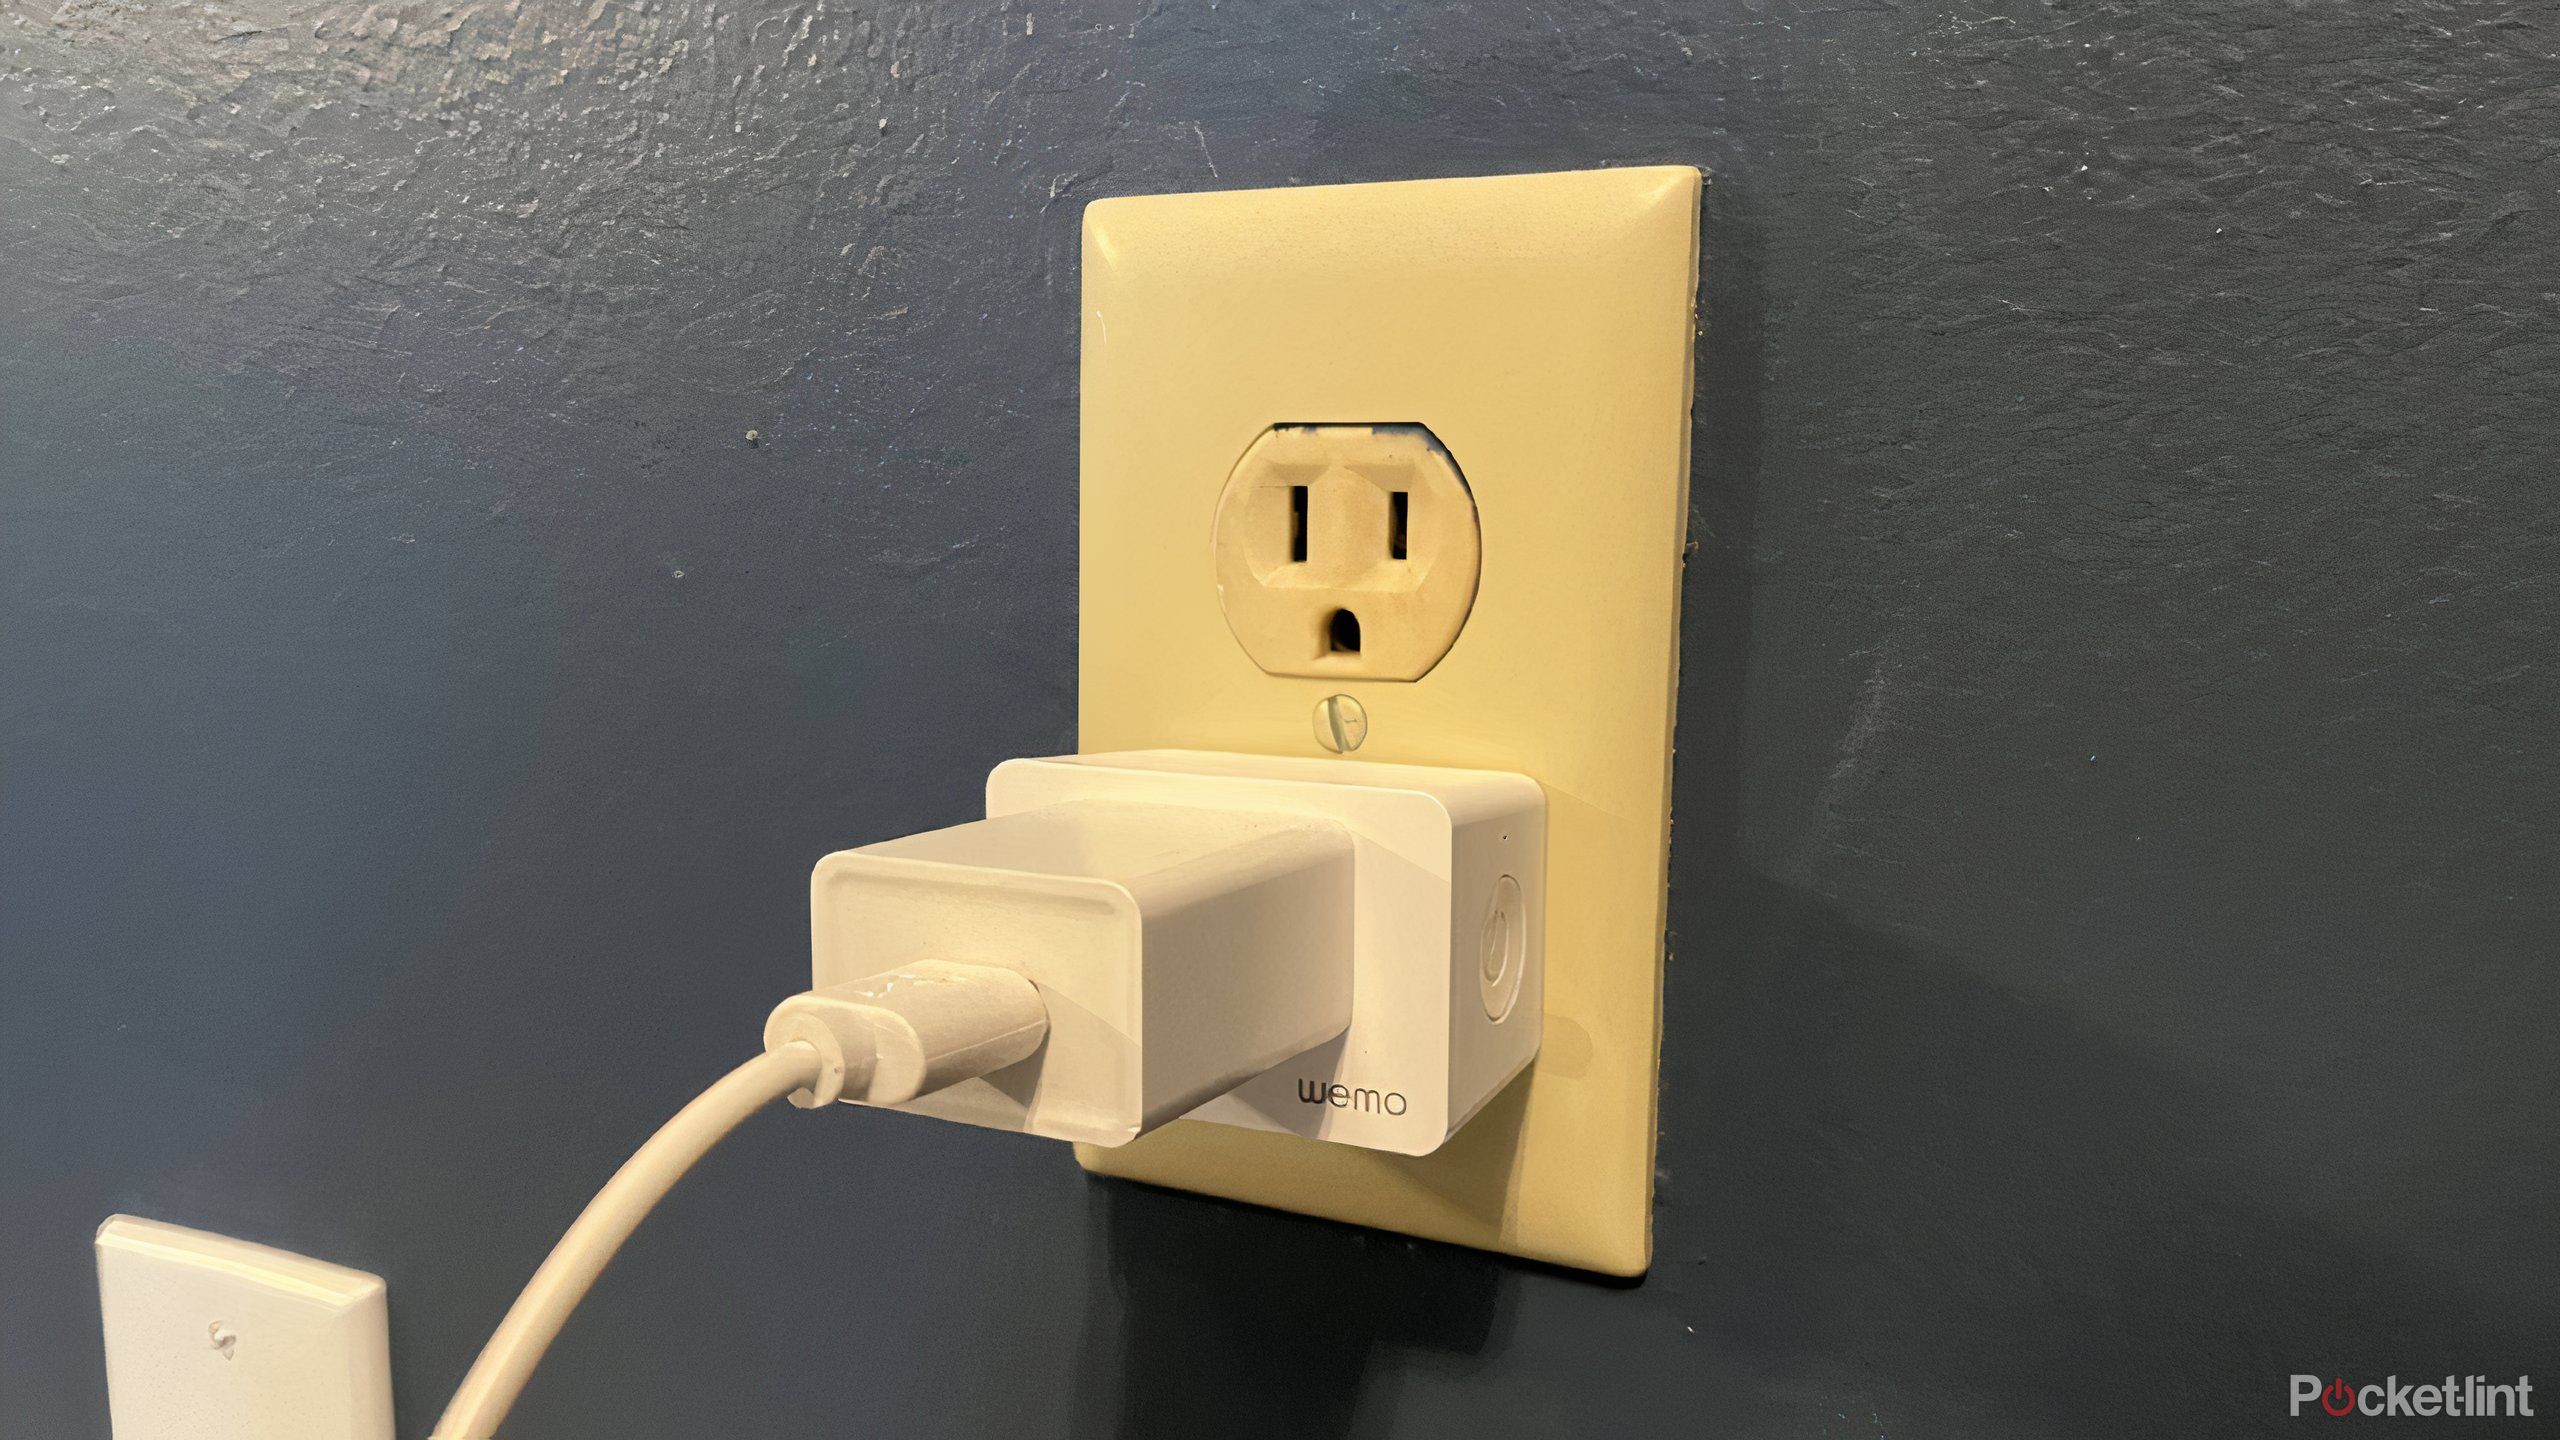 The Wemo smart plug in an outlet right side